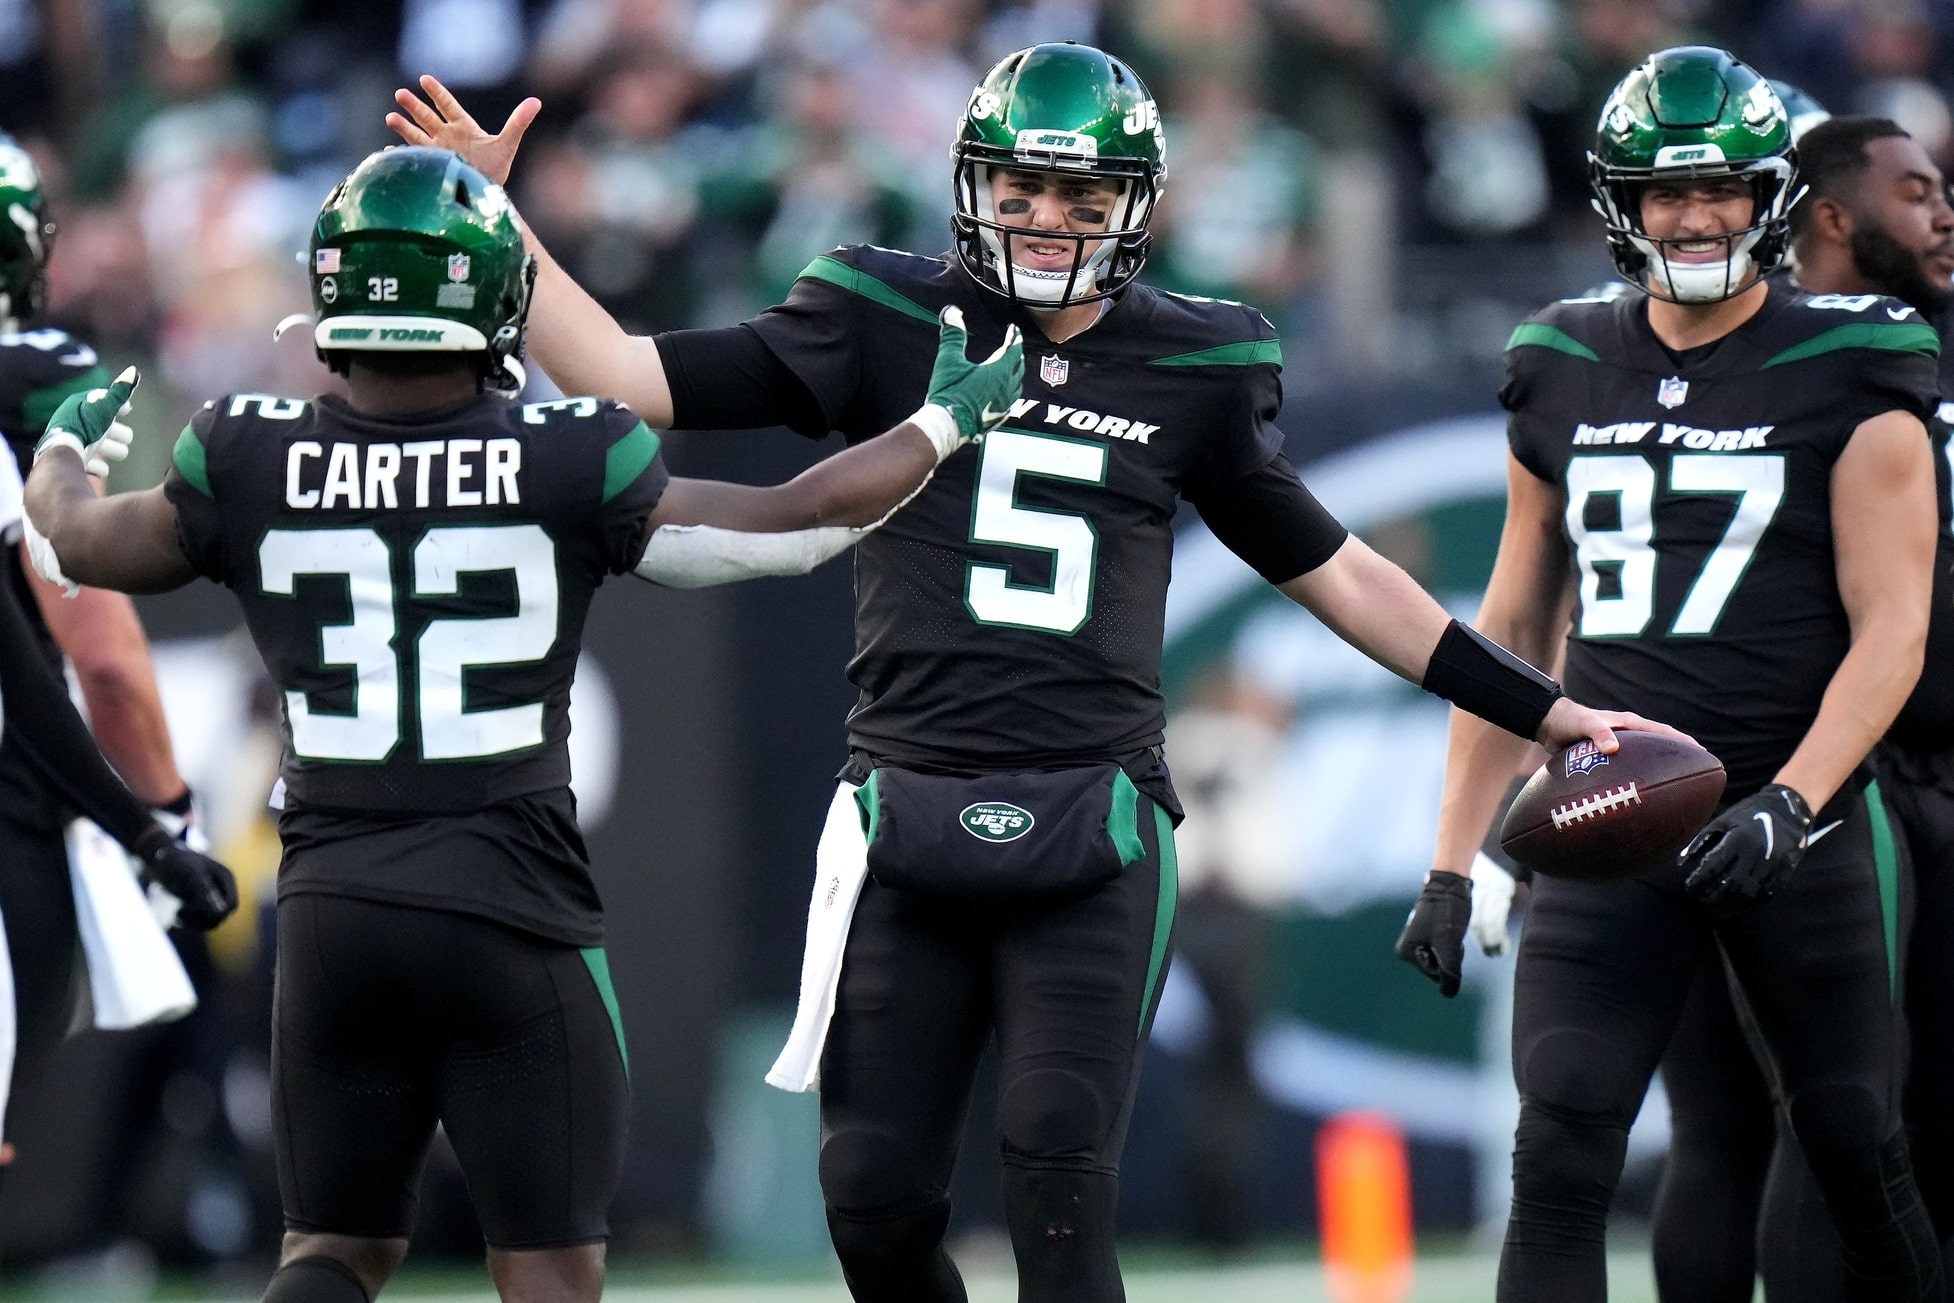 New York Jets quarterback Mike White (5) celebrates the victory with New York Jets running back Michael Carter (32) at the conclusion of a Week 8 NFL football game against the Cincinnati Bengals.